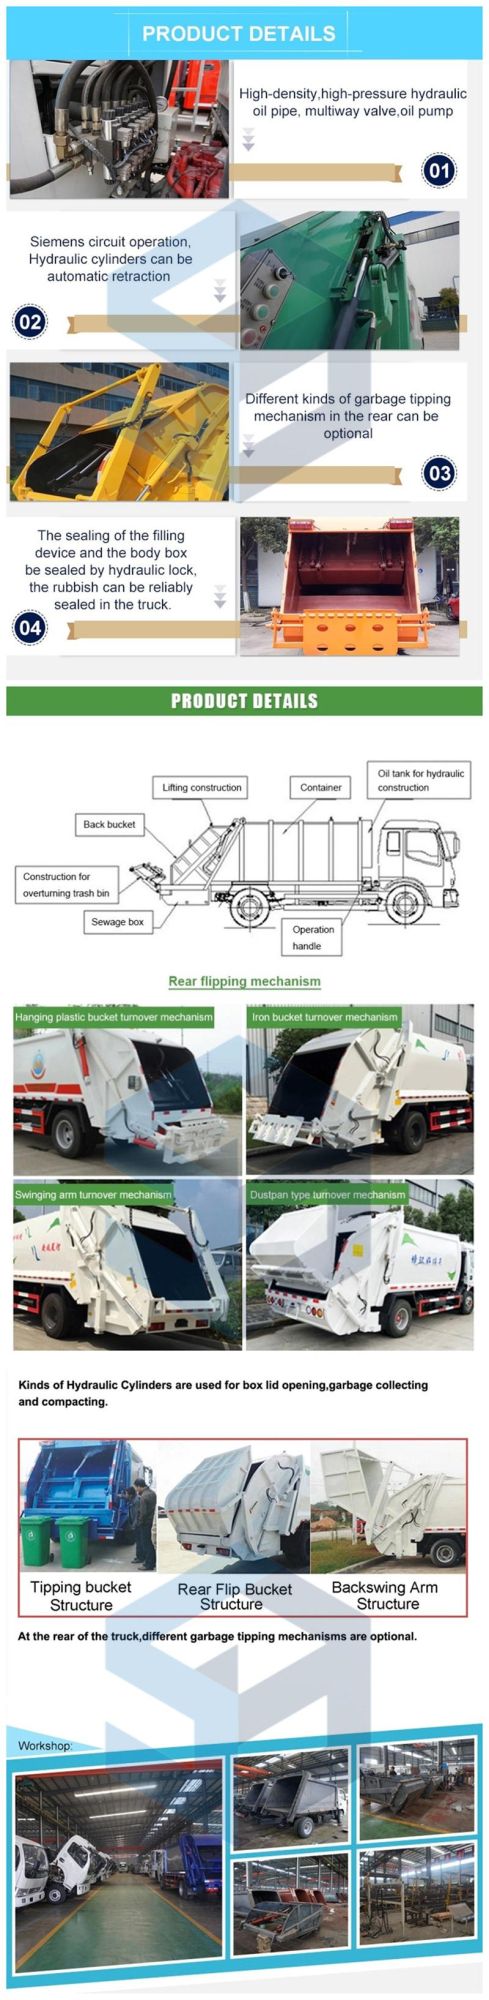 4X2 Factory Price 12 Cbm Garbage Recycling Truck Garbage Compactor Truck